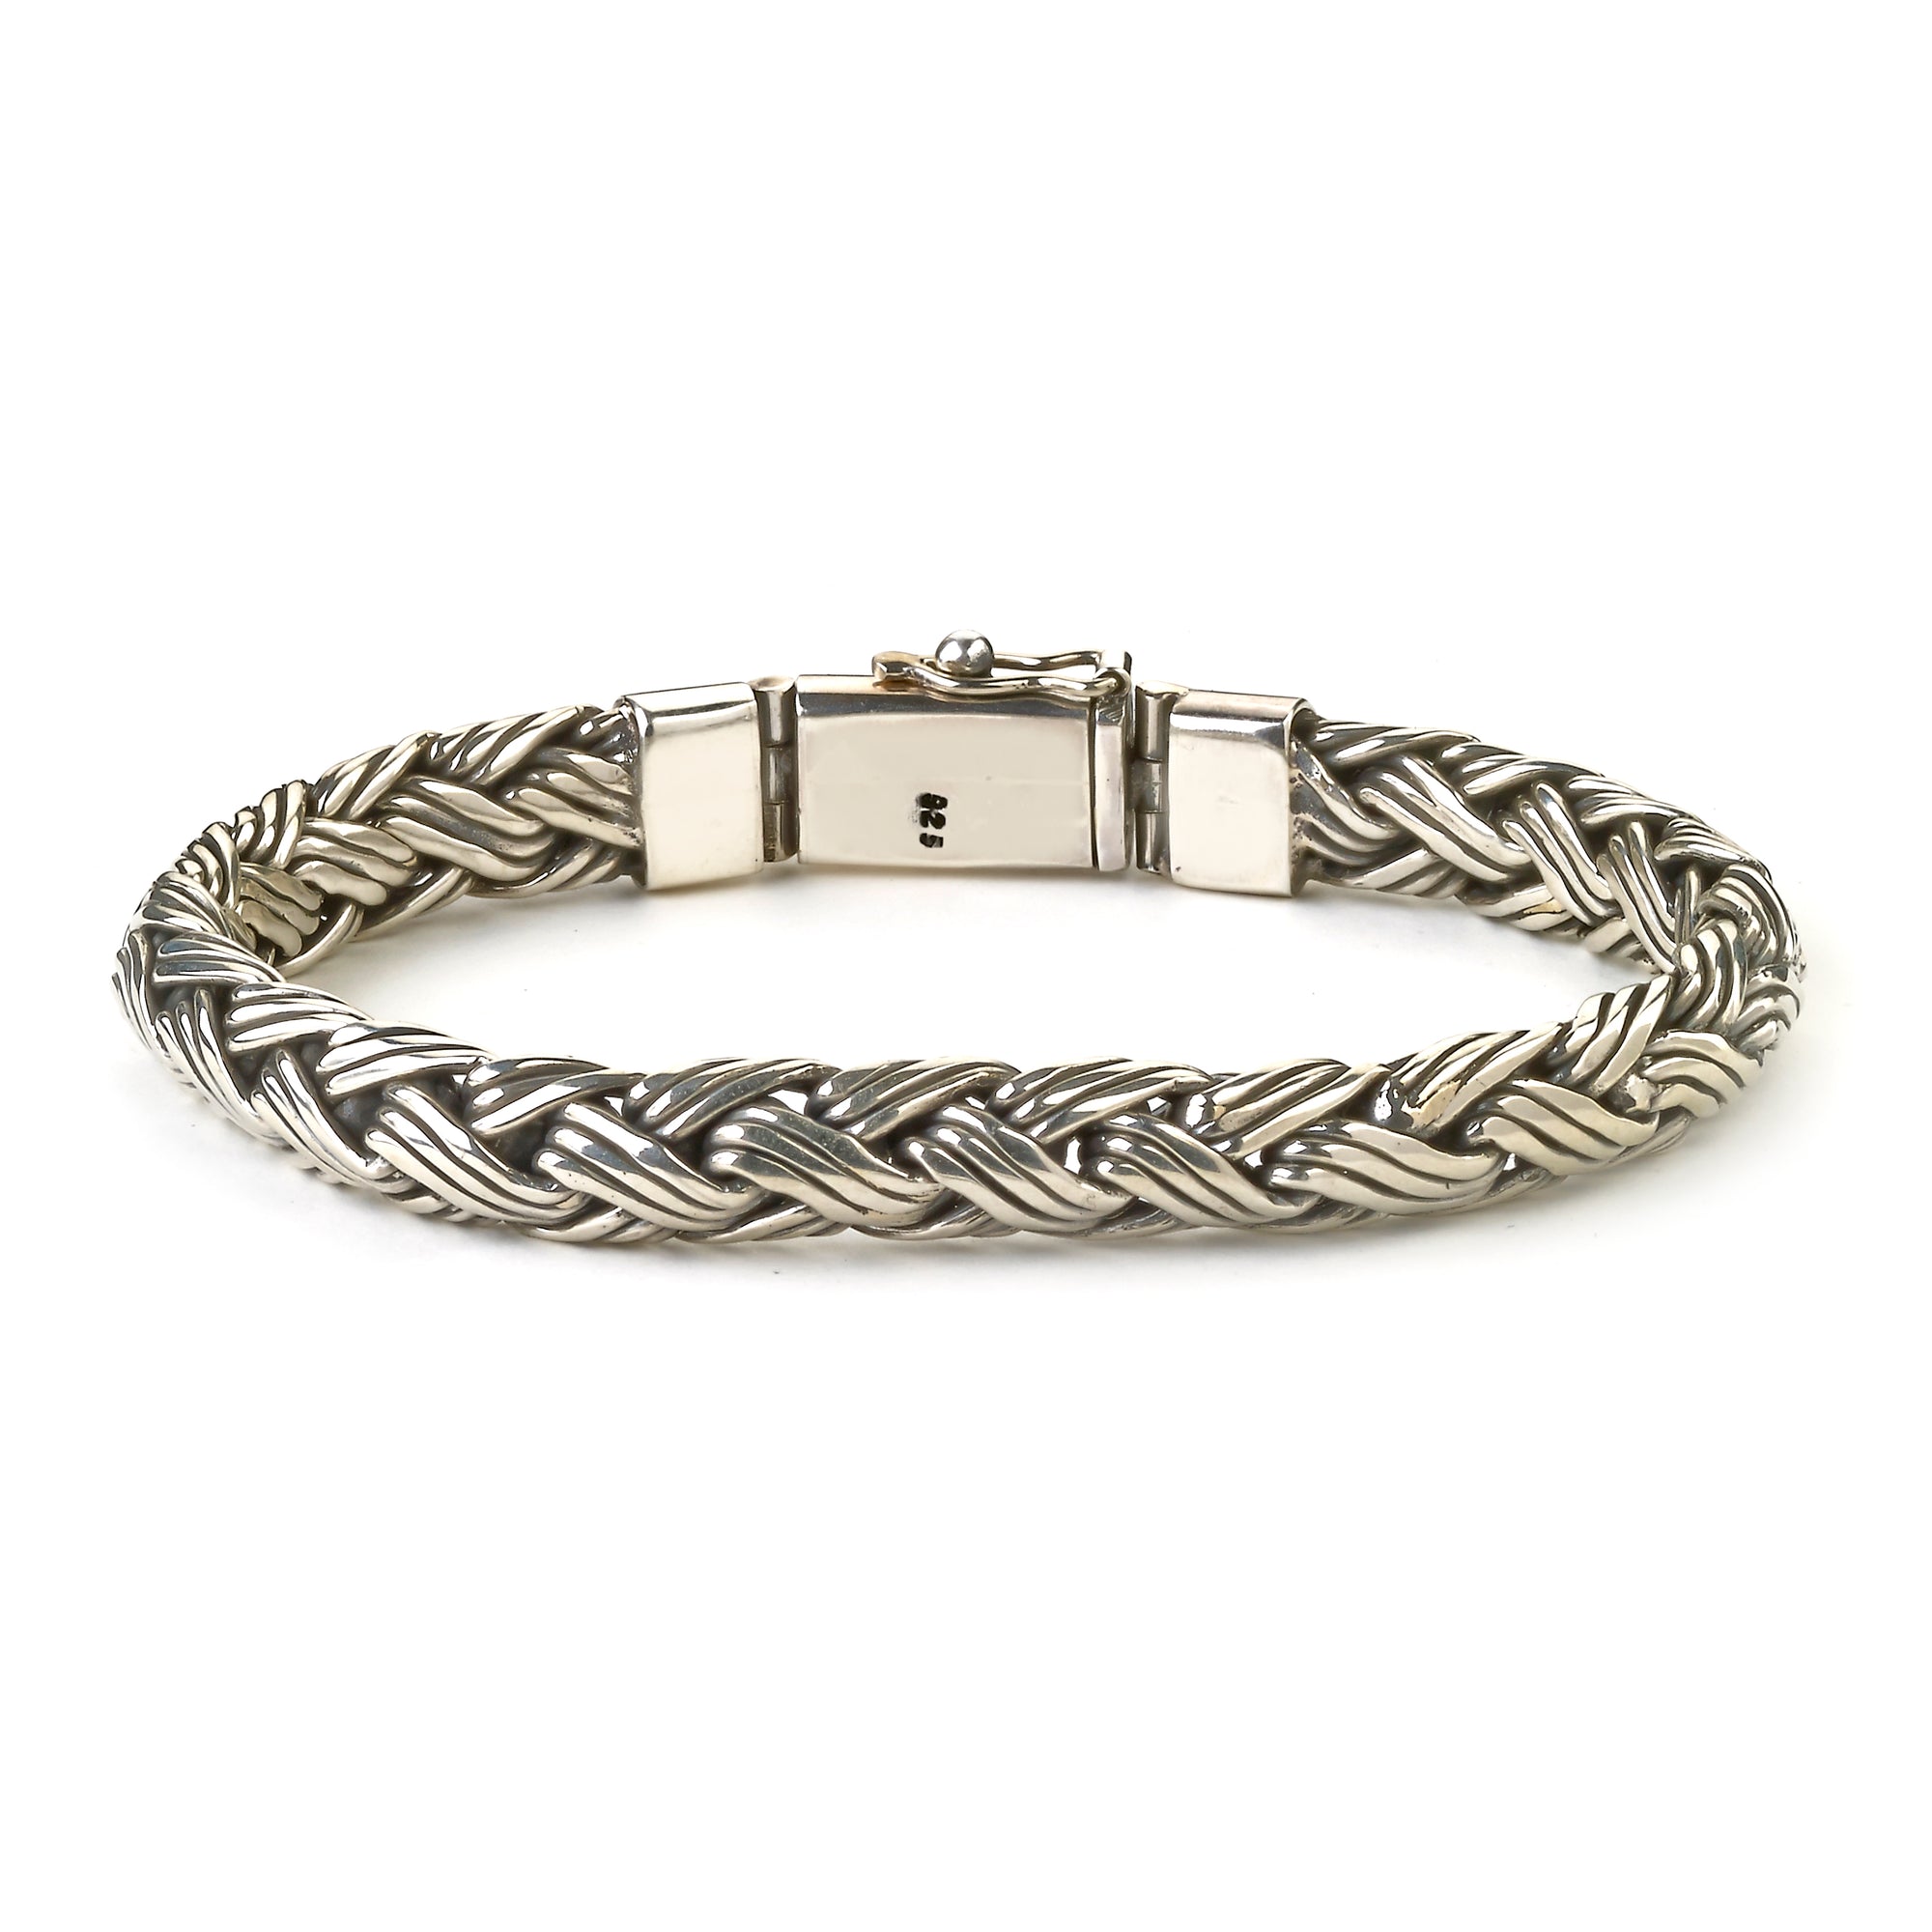 Marcel Men’s Bracelet available at Talisman Collection Fine Jewelers in El Dorado Hills, CA and online. Specs: Marcel Bracelet crafted in Sterling Silver features a woven design and measures 8". 